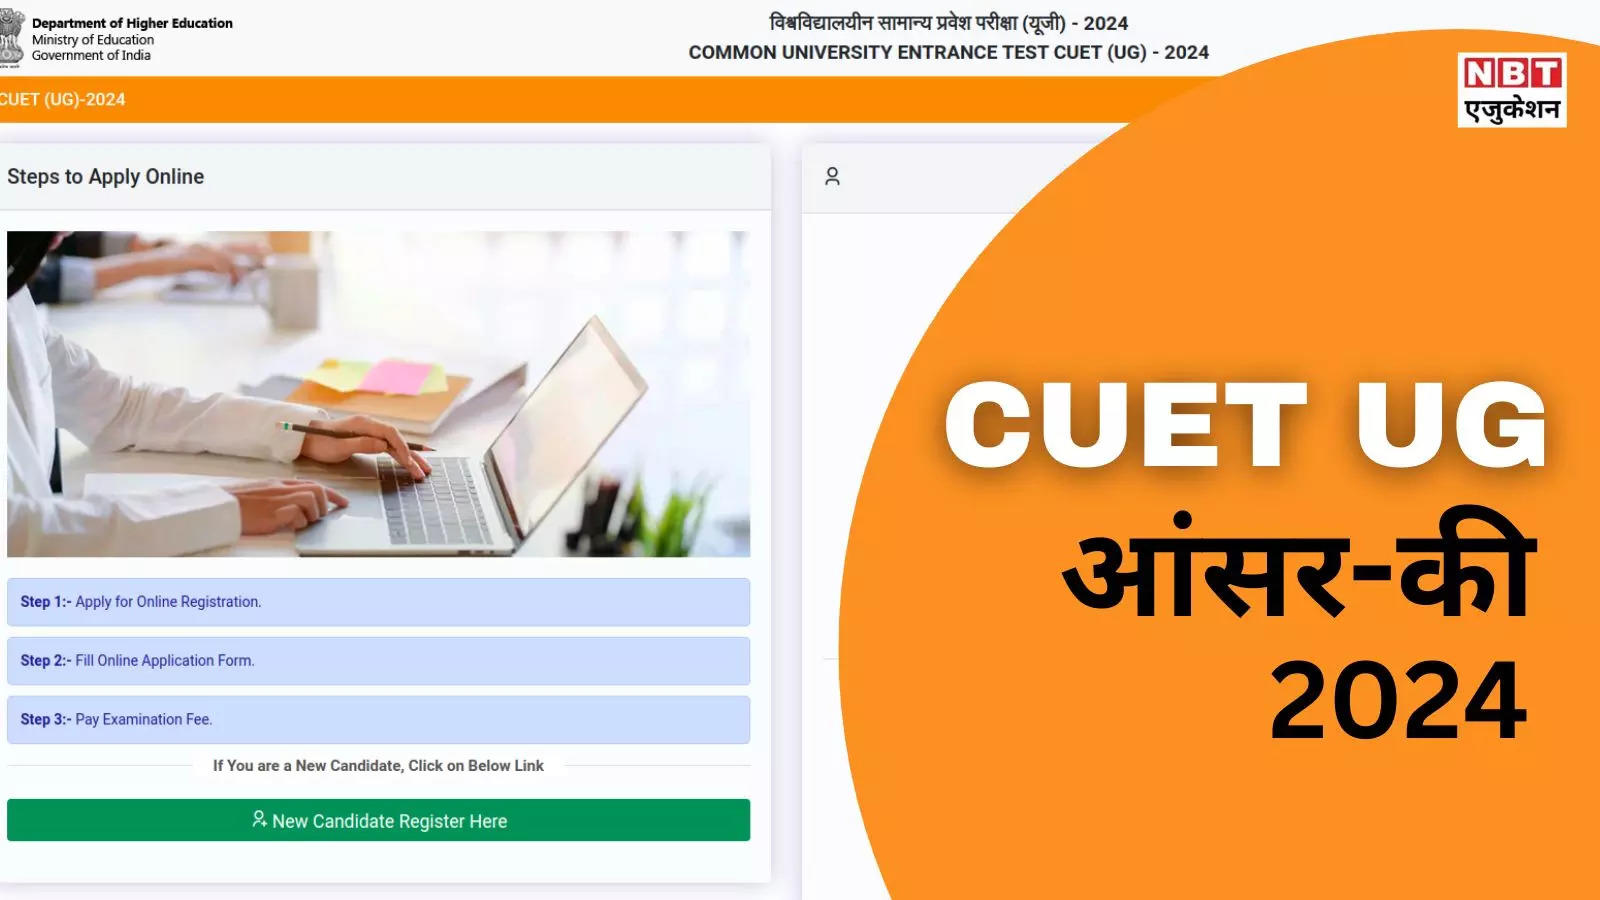 CUET UG Answer Key 2024: Here's the direct link to download CUET UG answer key PDF